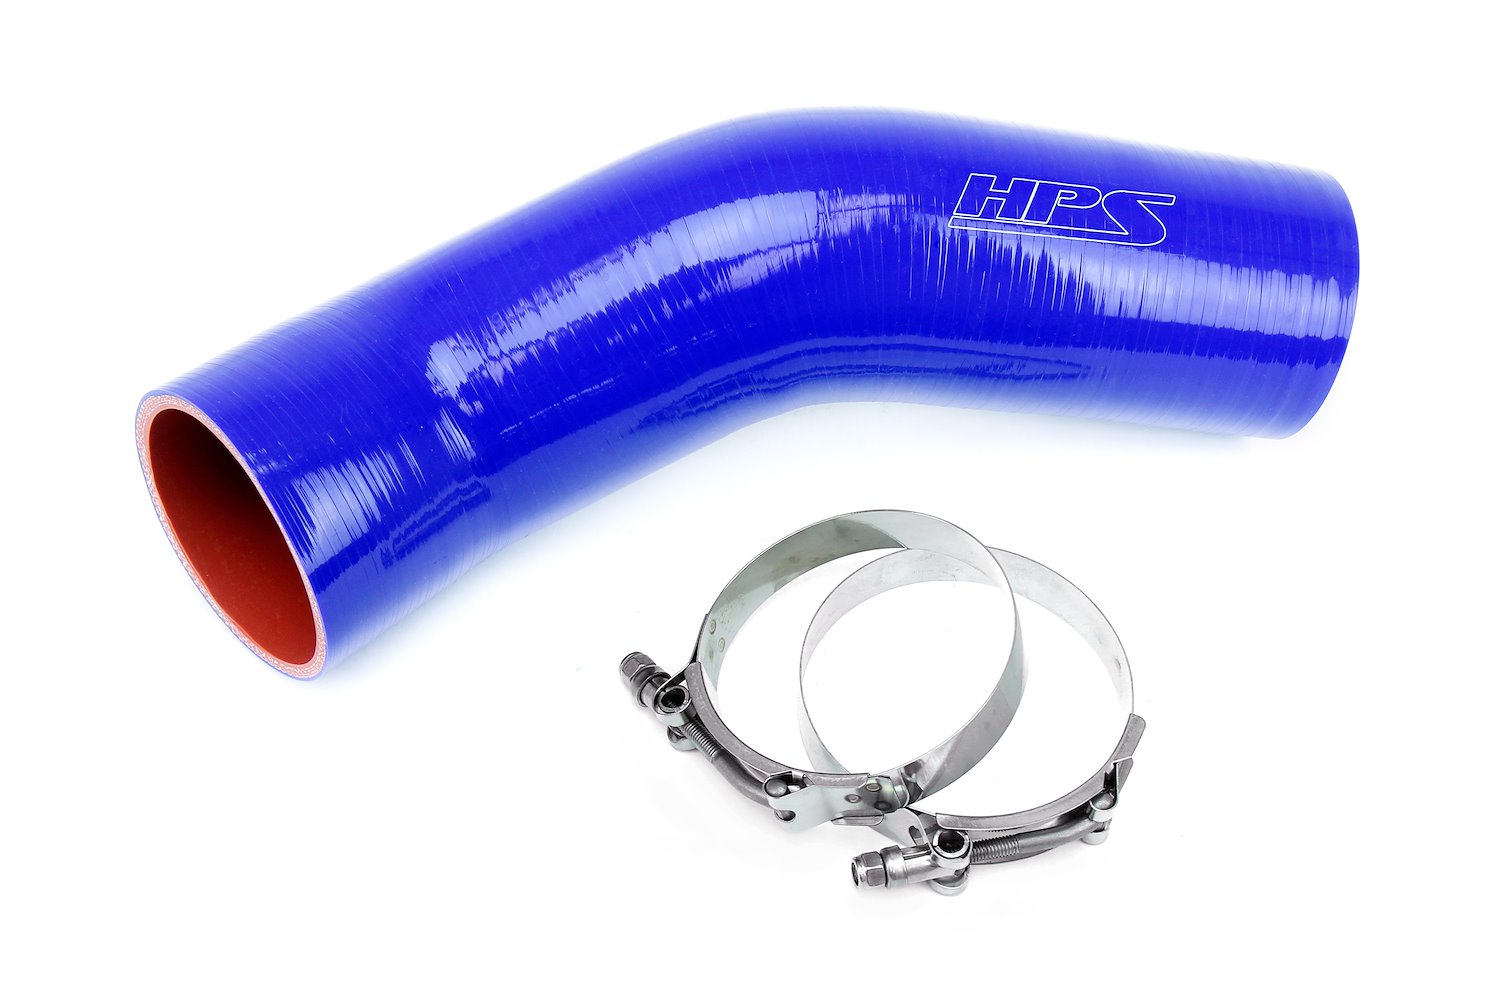 57-1879-BLUE Silicone Air Intake Kit, Replace Damaged Or Restrictive Stock Air Intake, Improve Throttle Response